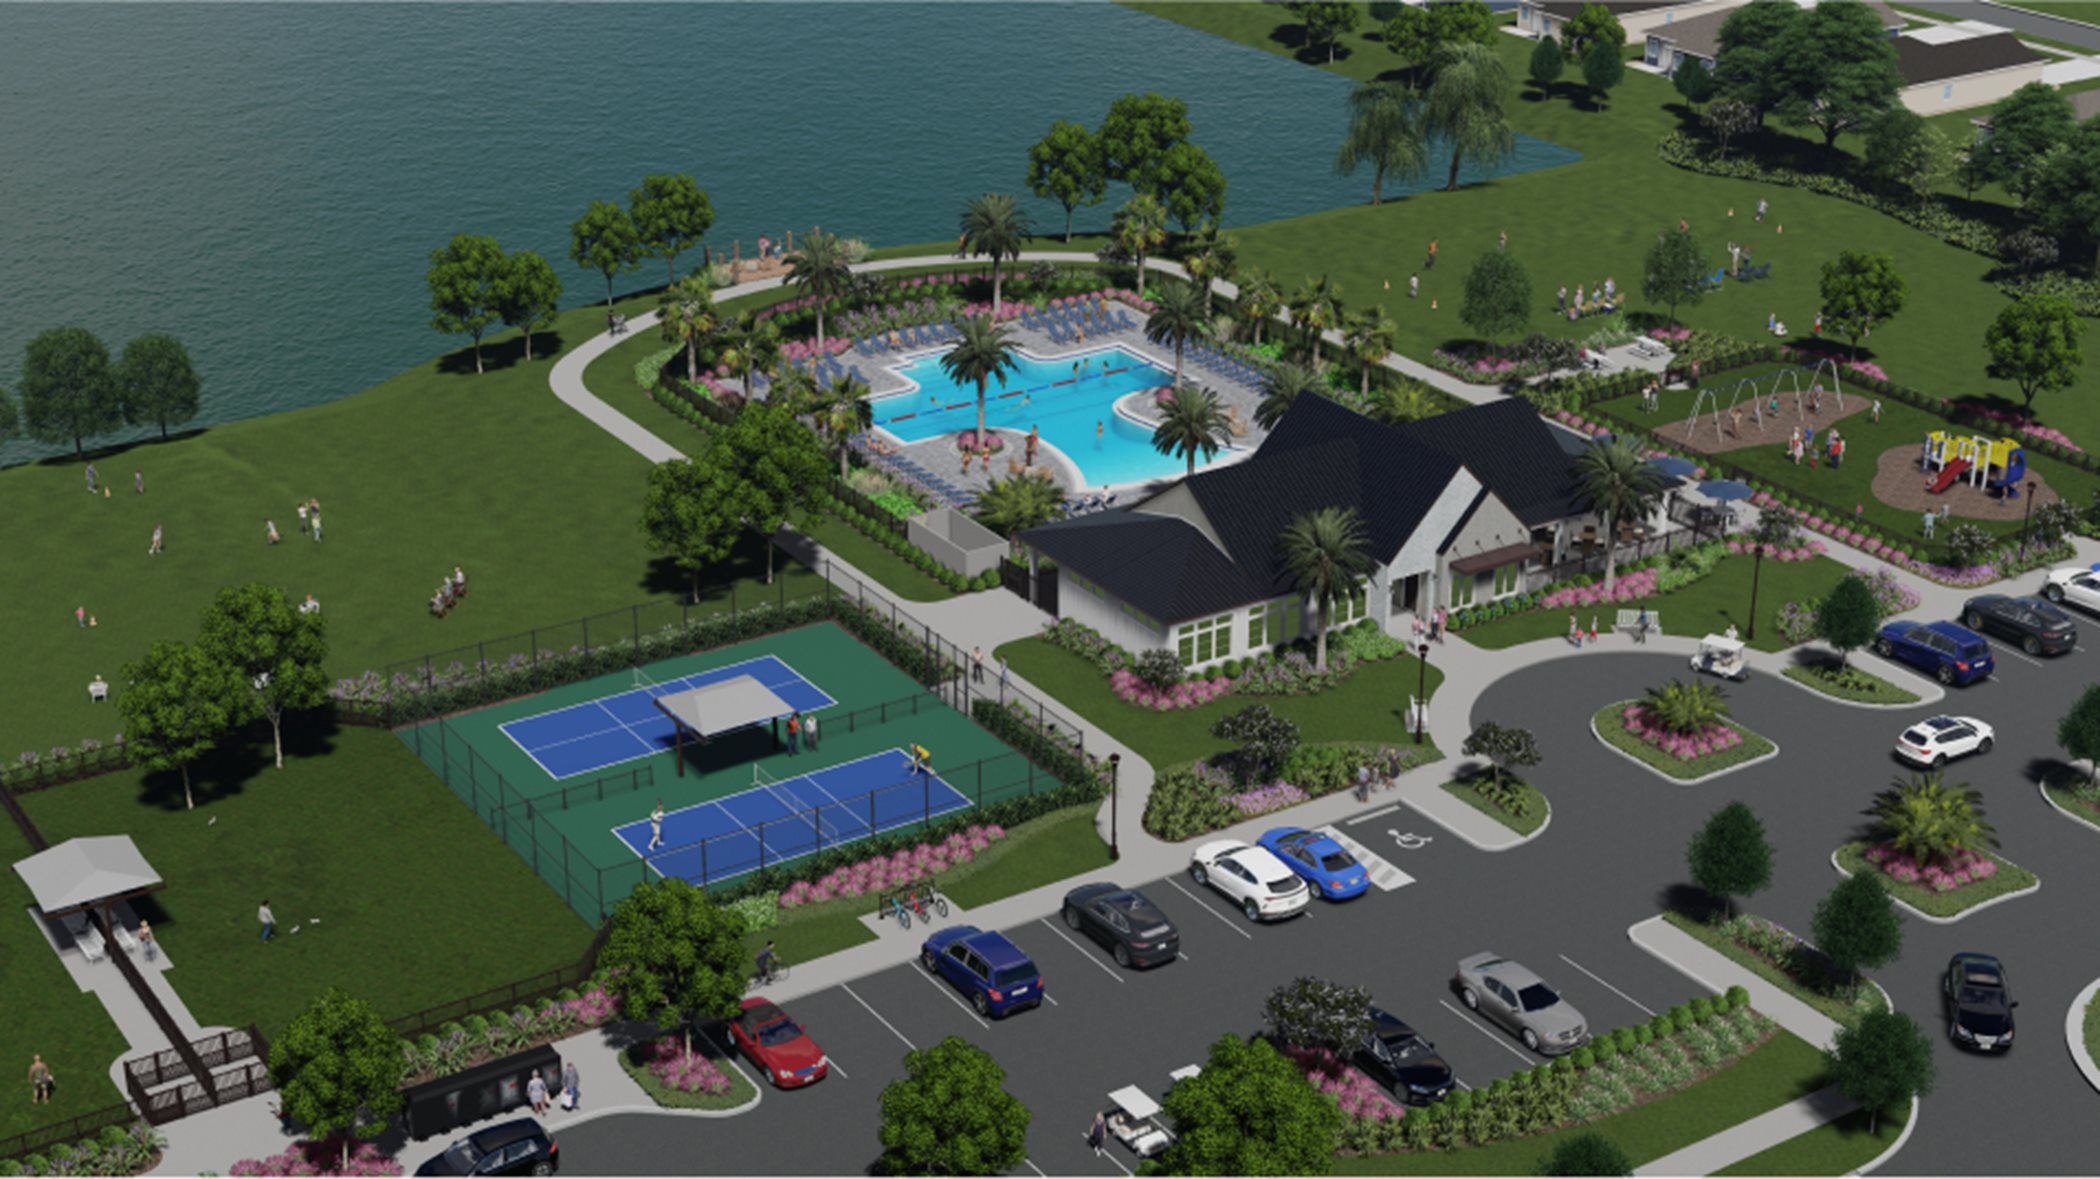 Brystol at Wylder clubhouse amenity rendering